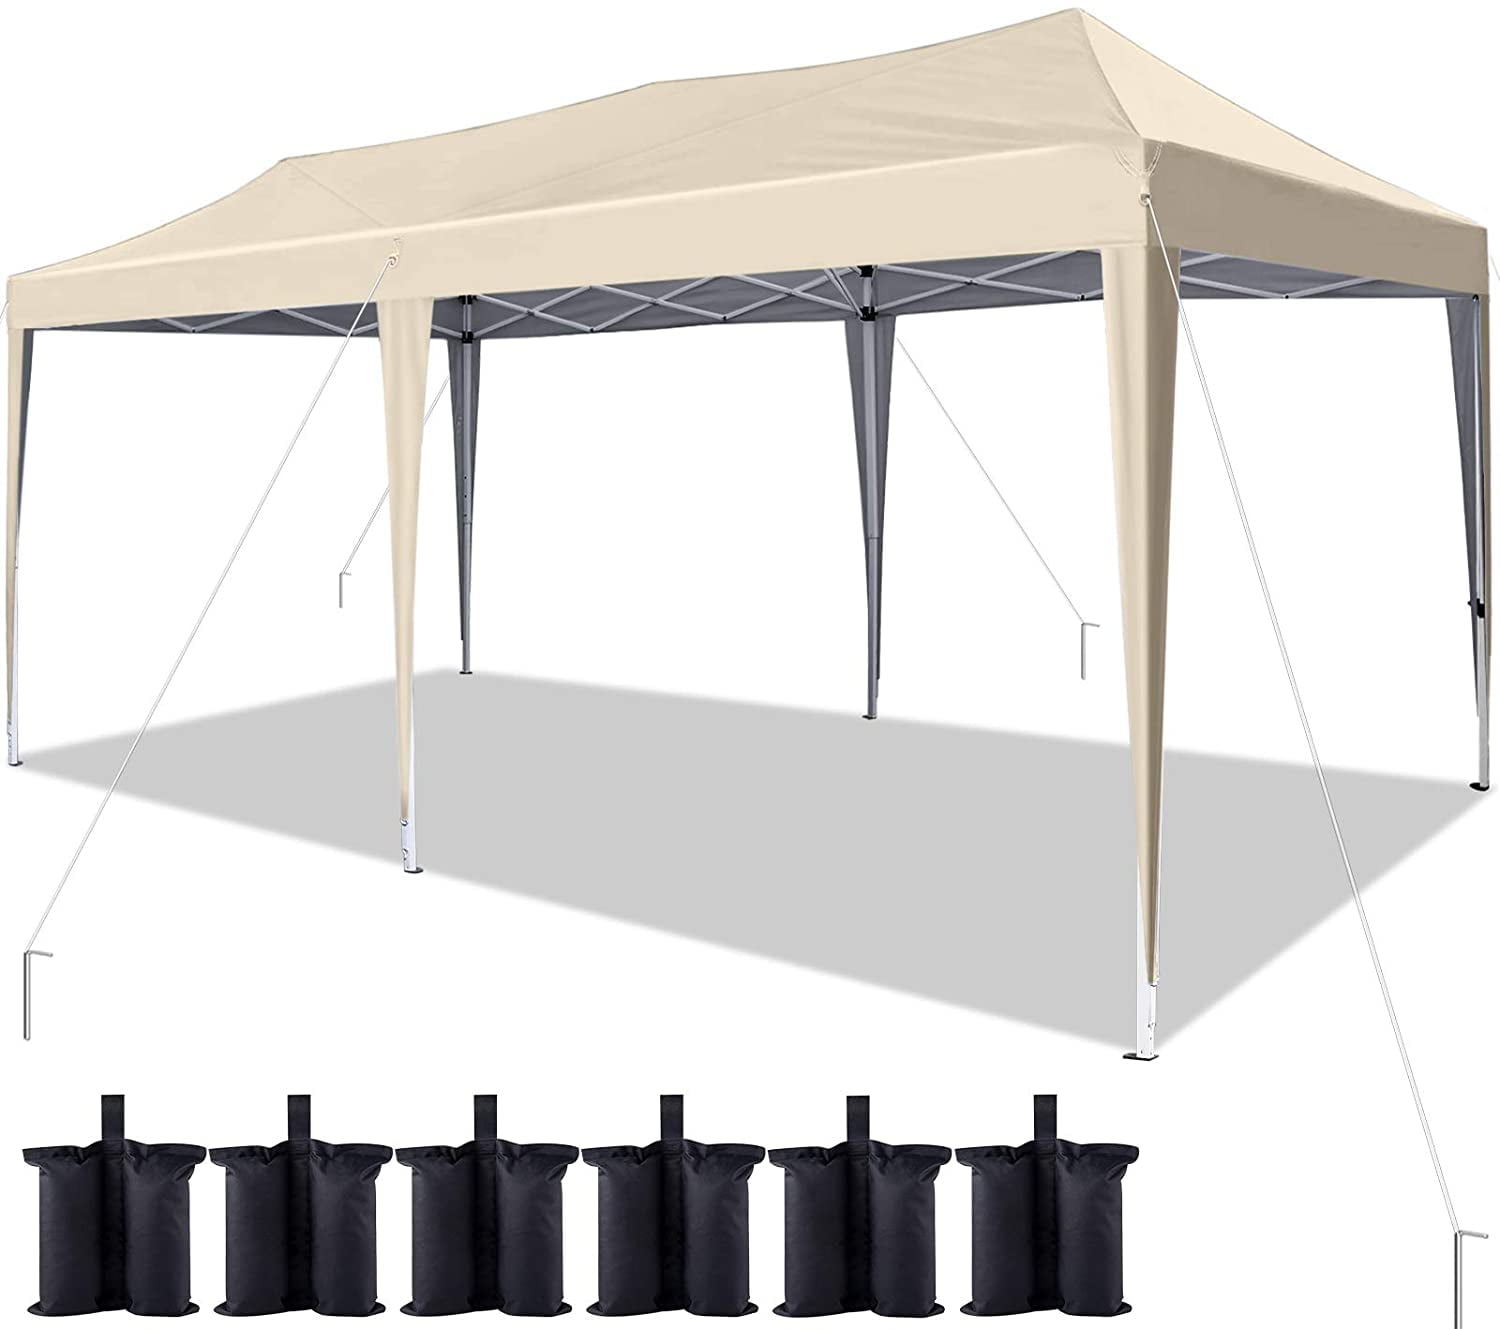 TITAN® 3m x 3m Heavy Duty Wedding Party Tent Gazebo Event Marquee Canopy Awning 